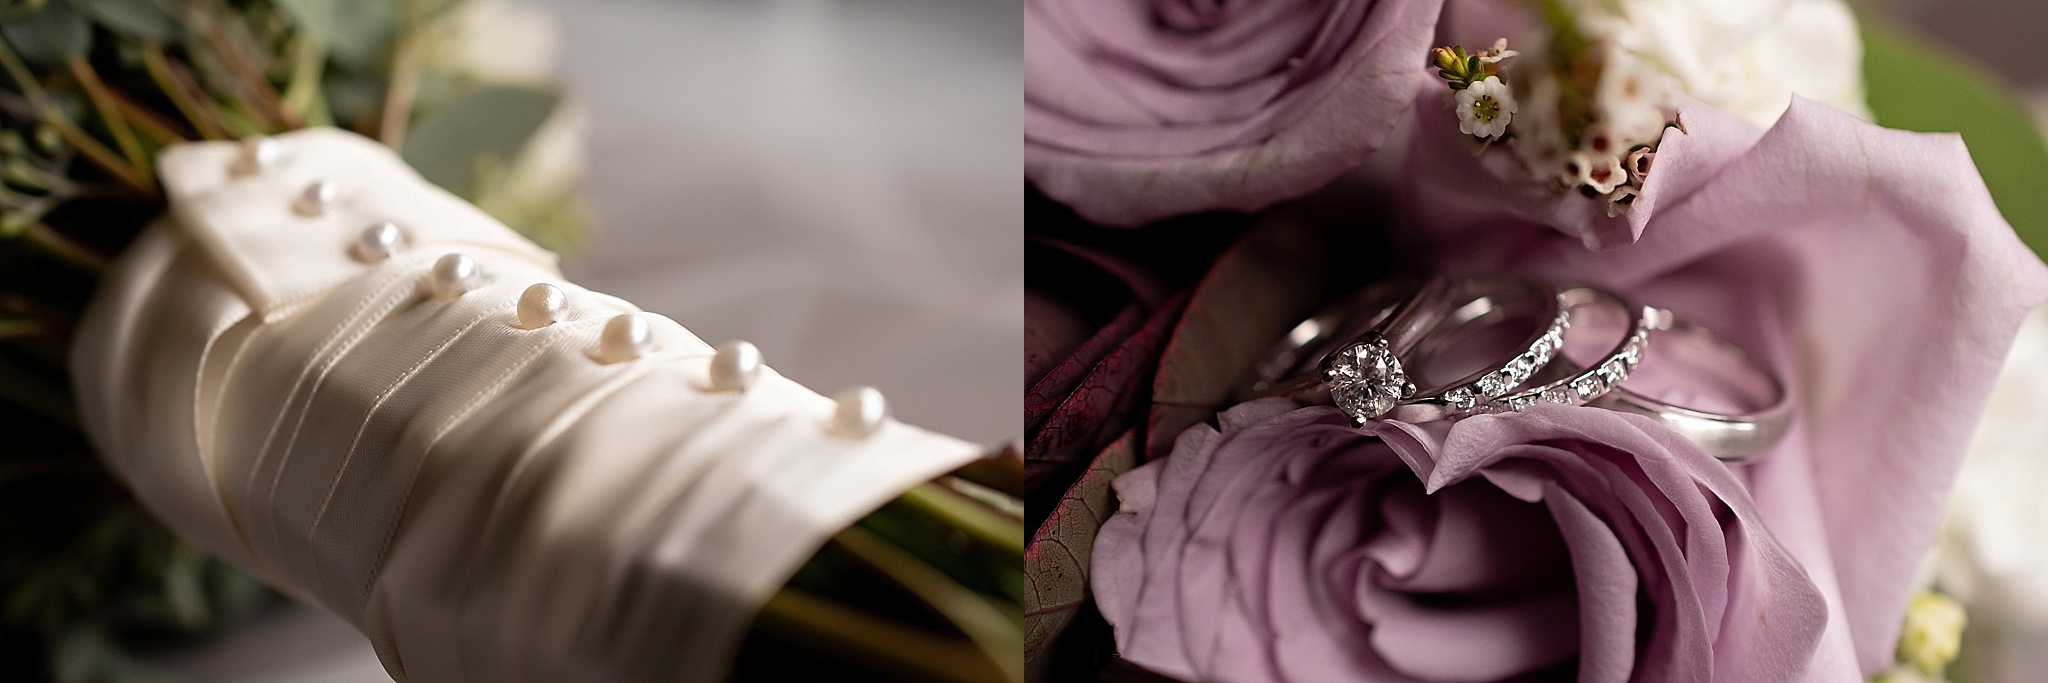 lavender wedding roses off white wrapped stems